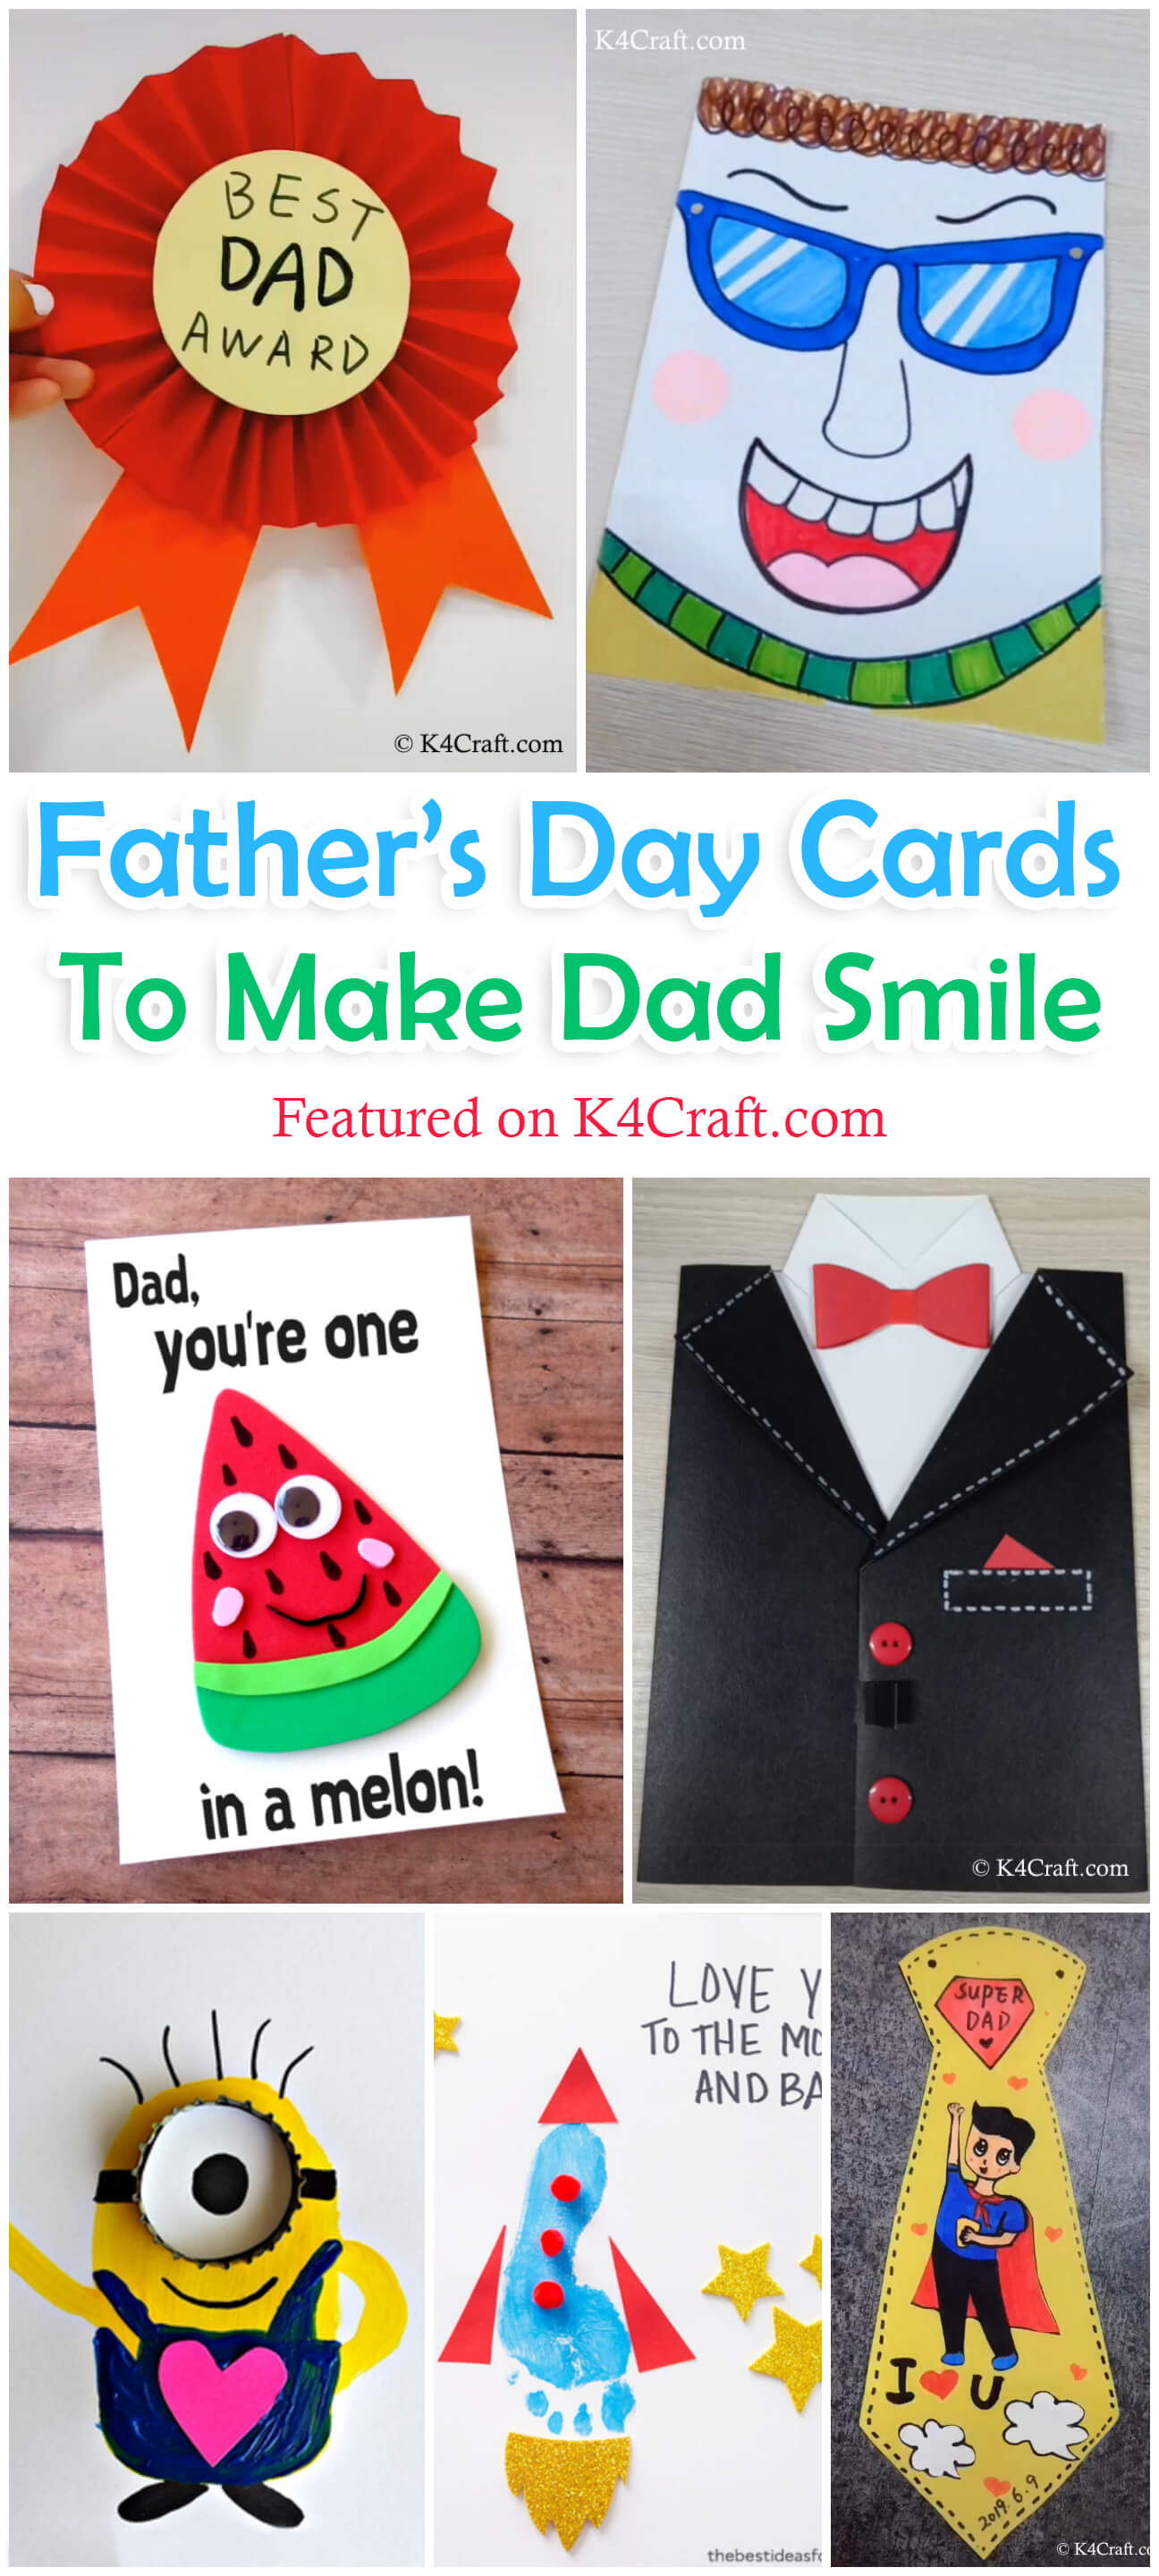 Create Unique Father's Day Cards with DIY Pop Up Cards!